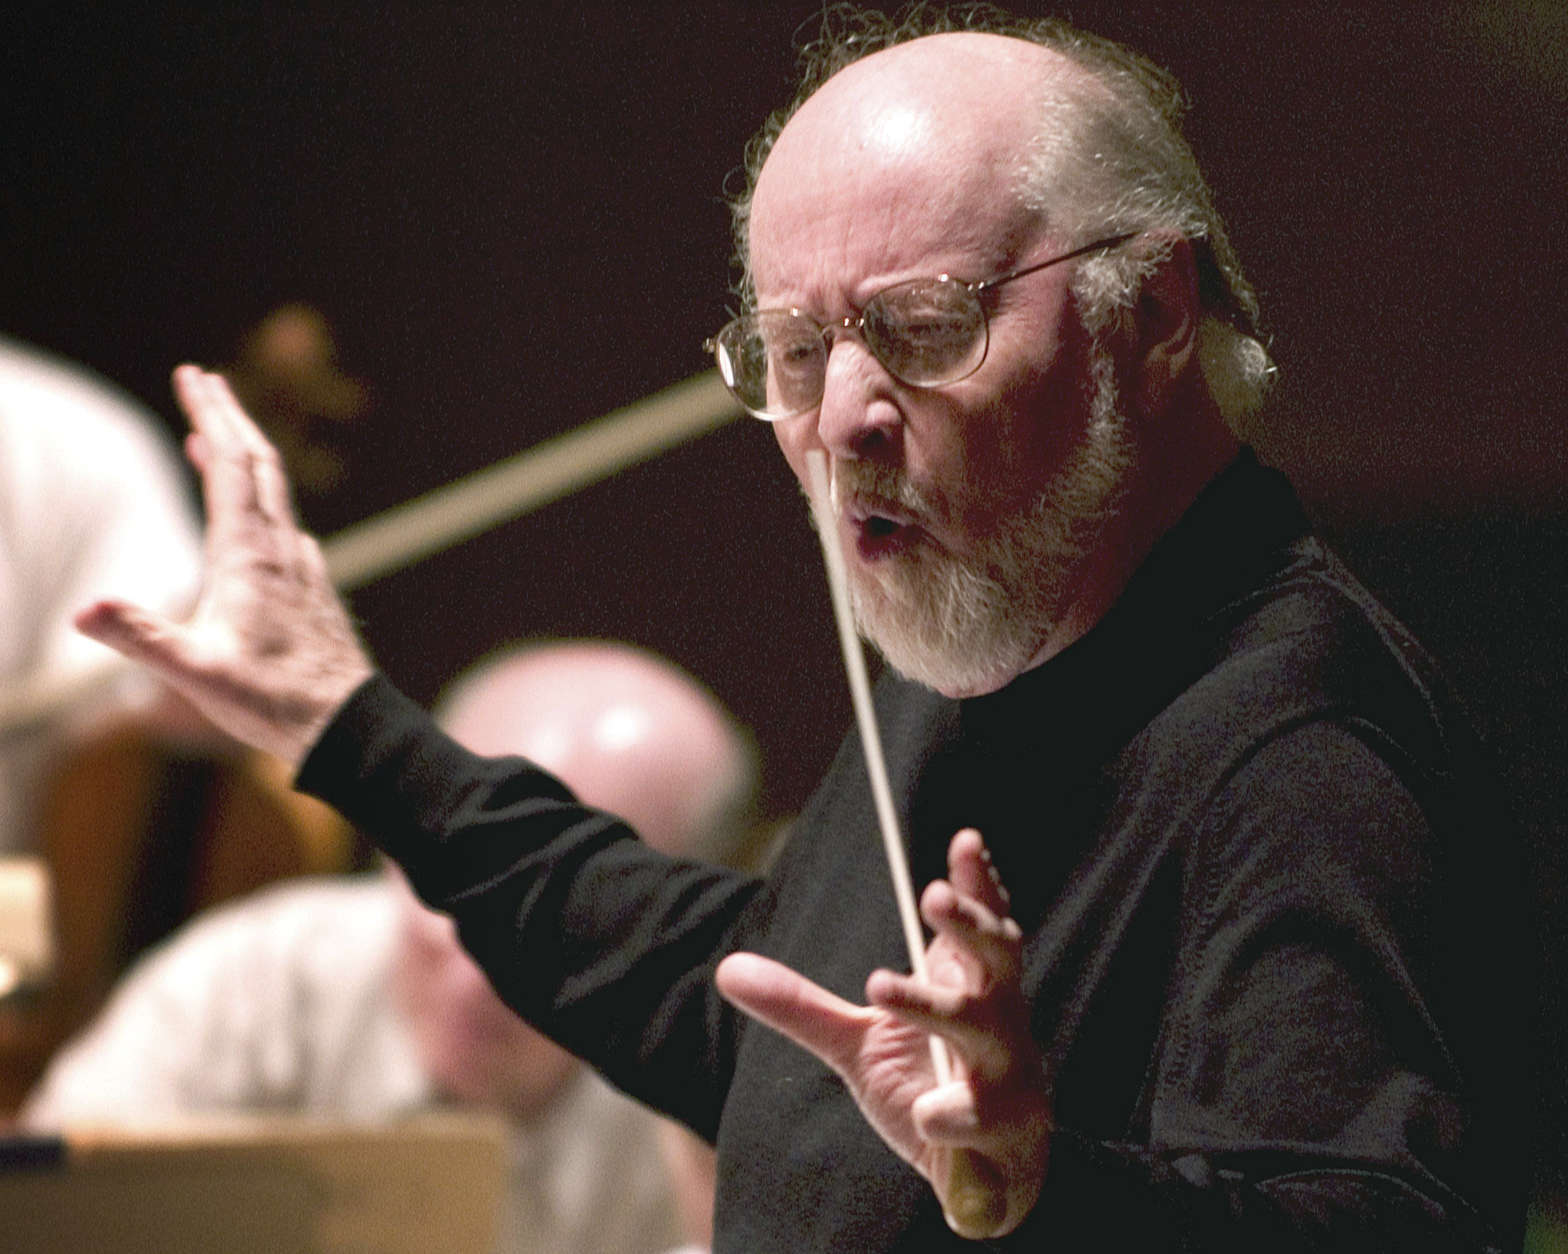 FILE - In this Tuesday, May 18, 2004 file photo composer John Williams leads the Boston Pops orchestra during a rehearsal in Boston. Williams, an Oscar- and Grammy-winning composer, who wrote the score for Star Wars: The Force Awakens, will help Pops conductor Keith Lockhart lead a performance of selections from the hit movies soundtrack as part of the orchestra's spring concert schedule. (AP Photo/ Robert E. Klein, File)